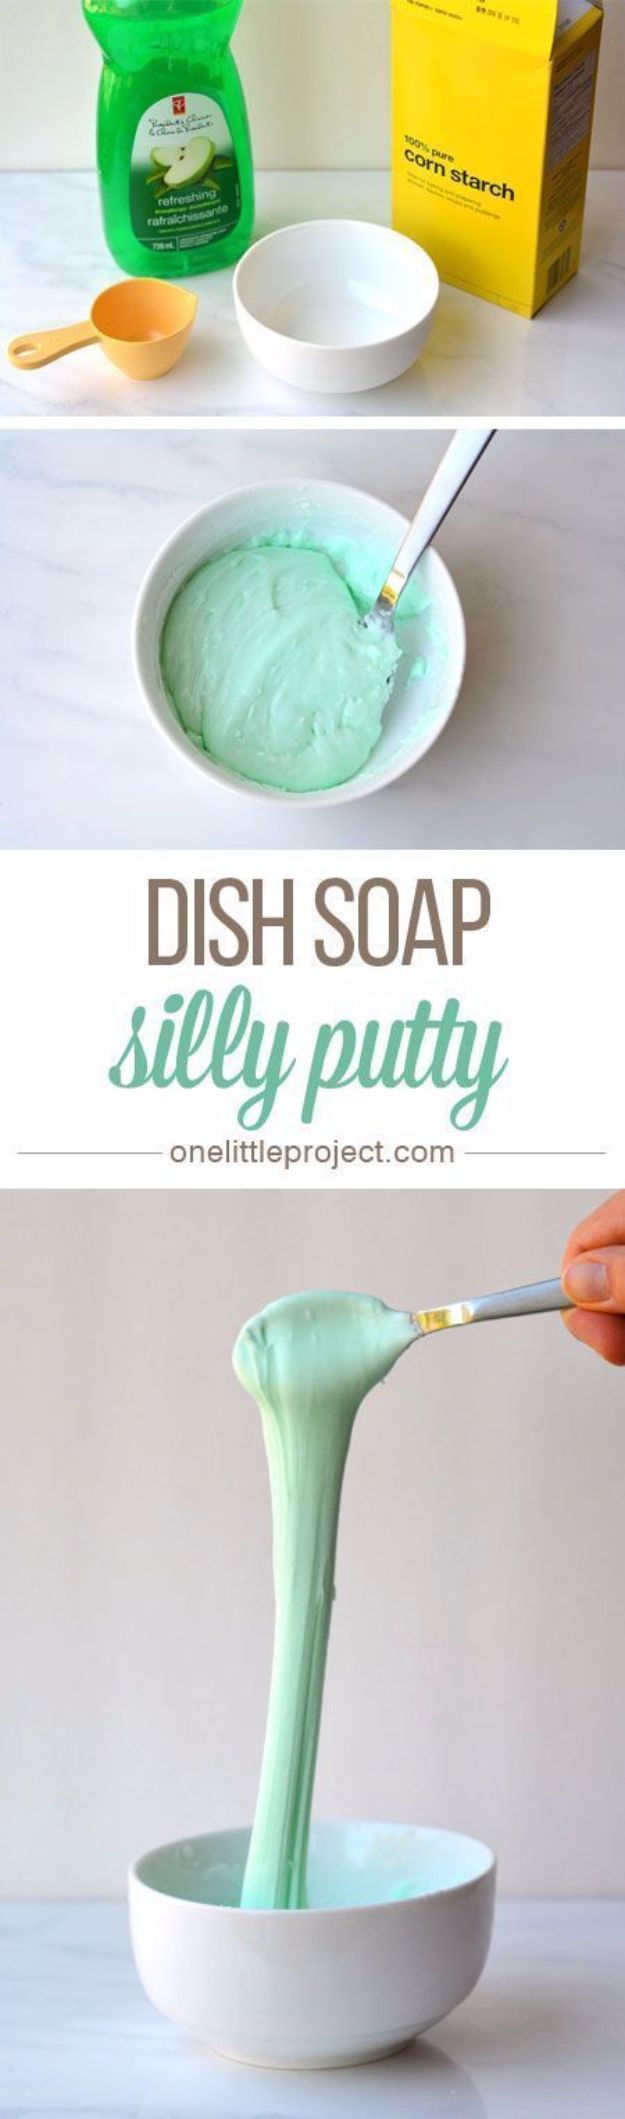 Best DIY Slime Recipes - Dish Soap Silly Putty - Cool and Easy Slime Recipe and Tutorials - Ideas Without Glue, Without Borax, For Kids, With Liquid Starch, Cornstarch and Laundry Detergent - How to Make Slime at Home - Fun Crafts and DIY Projects for Teens, Kids, Teenagers and Teens - Galaxy and Glitter Slime, Edible Slime, Rainbow Colored Slime, Shaving Cream recipes and more fun crafts and slimes #slimerecipes #slime #diyslime #teencrafts